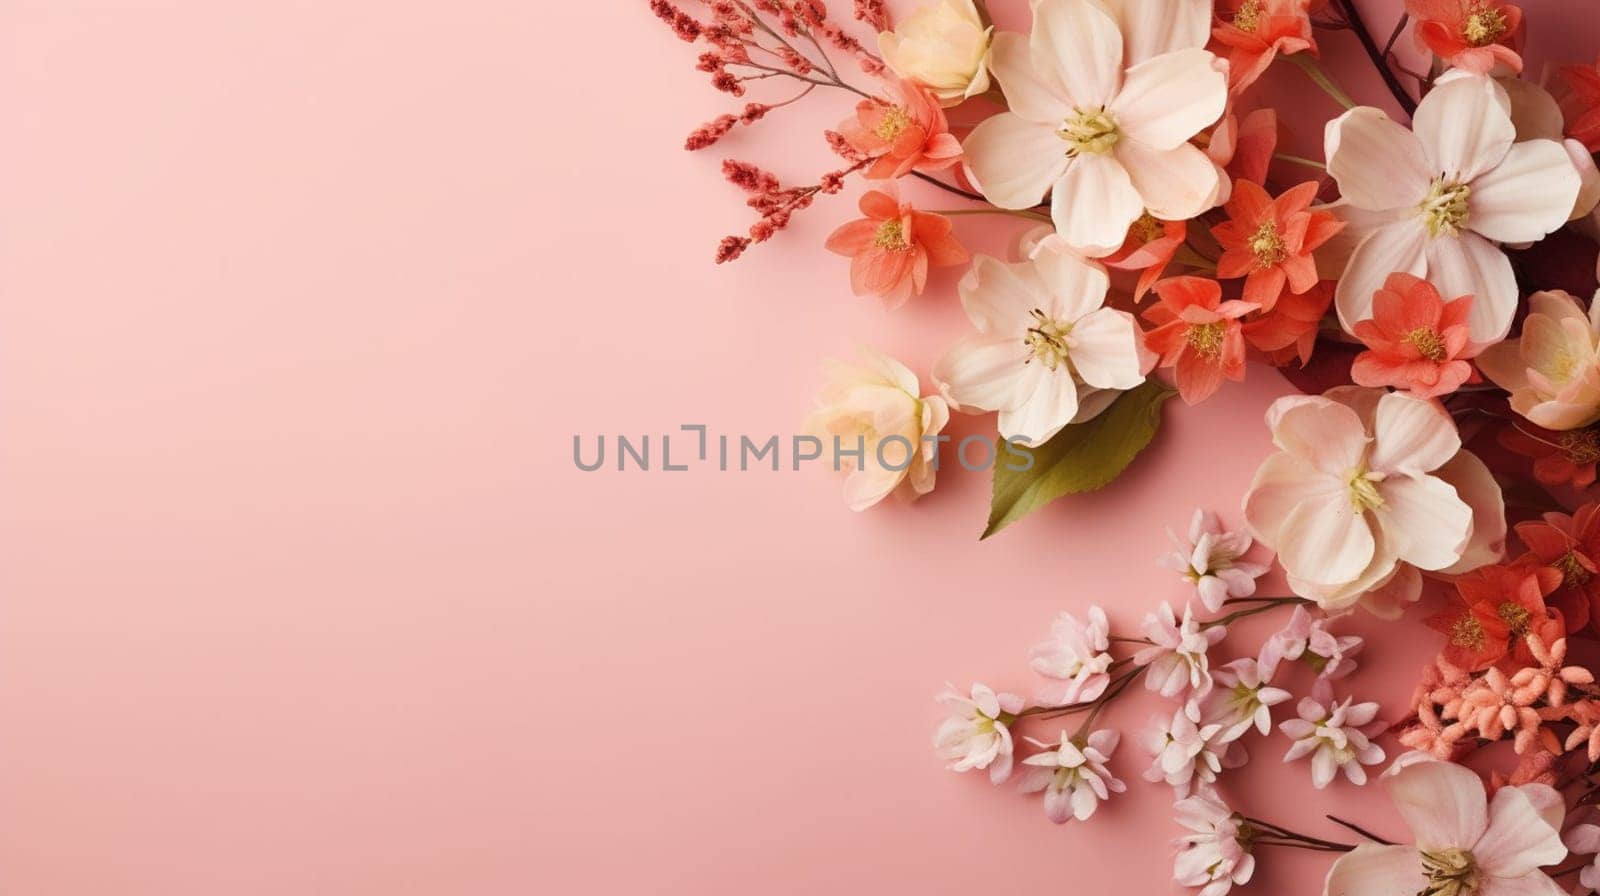 Elegant spring flowers arranged in the corner against a soft pink background, with a mix of pink and white blossoms creating a tranquil mood by kizuneko